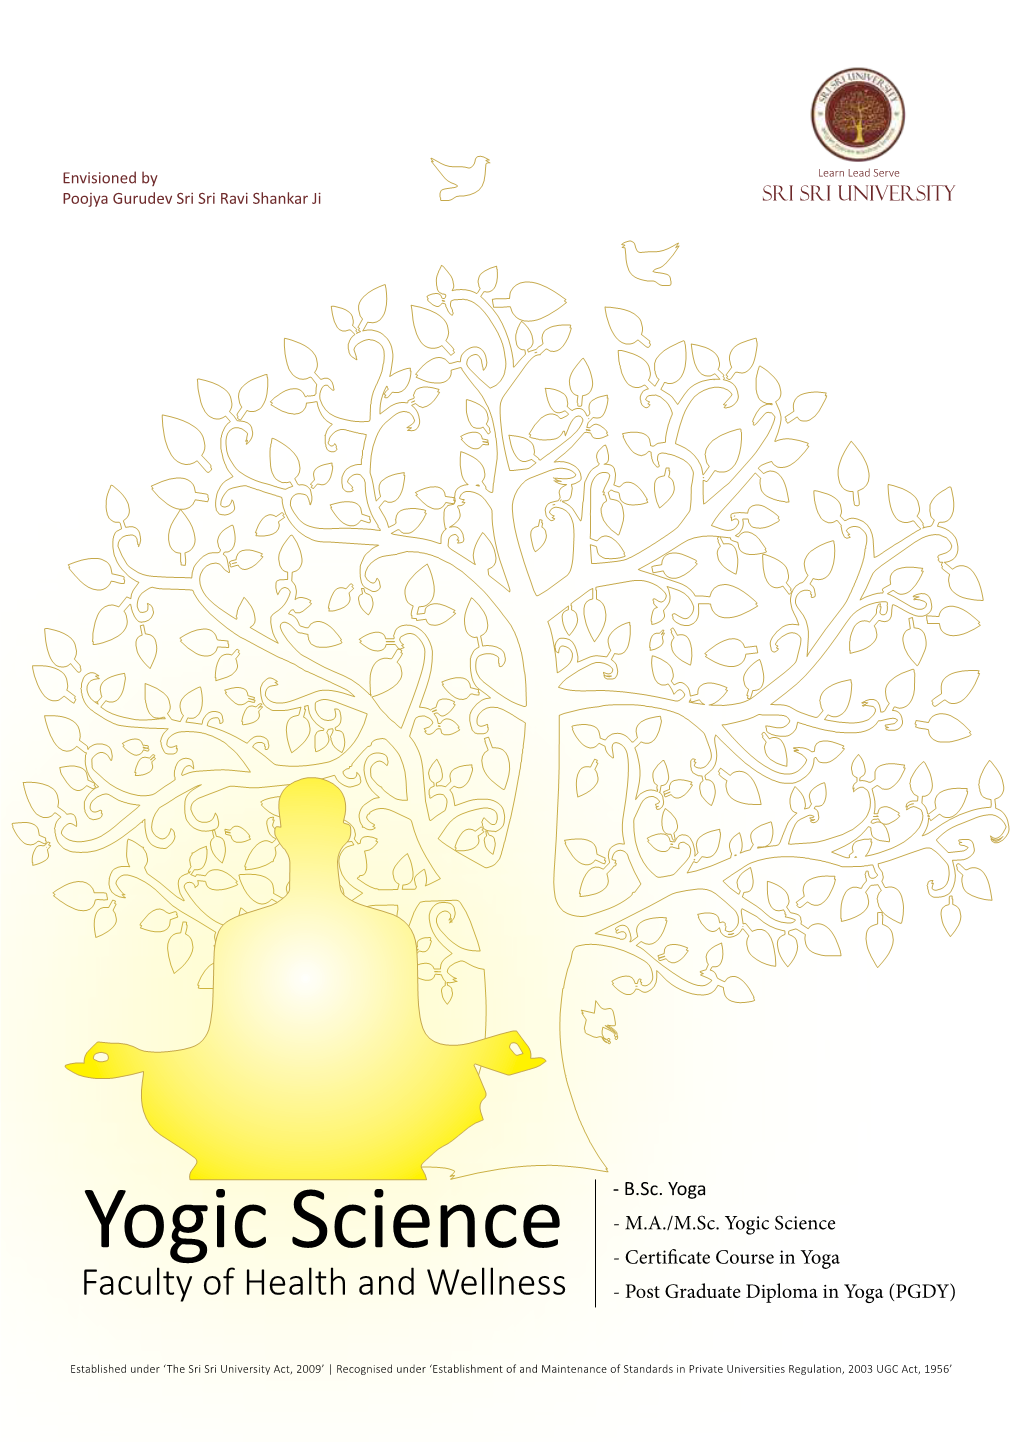 Yogic Science Yogic Science - Certificate Course in Yoga Faculty of Health and Wellness - Post Graduate Diploma in Yoga (PGDY)